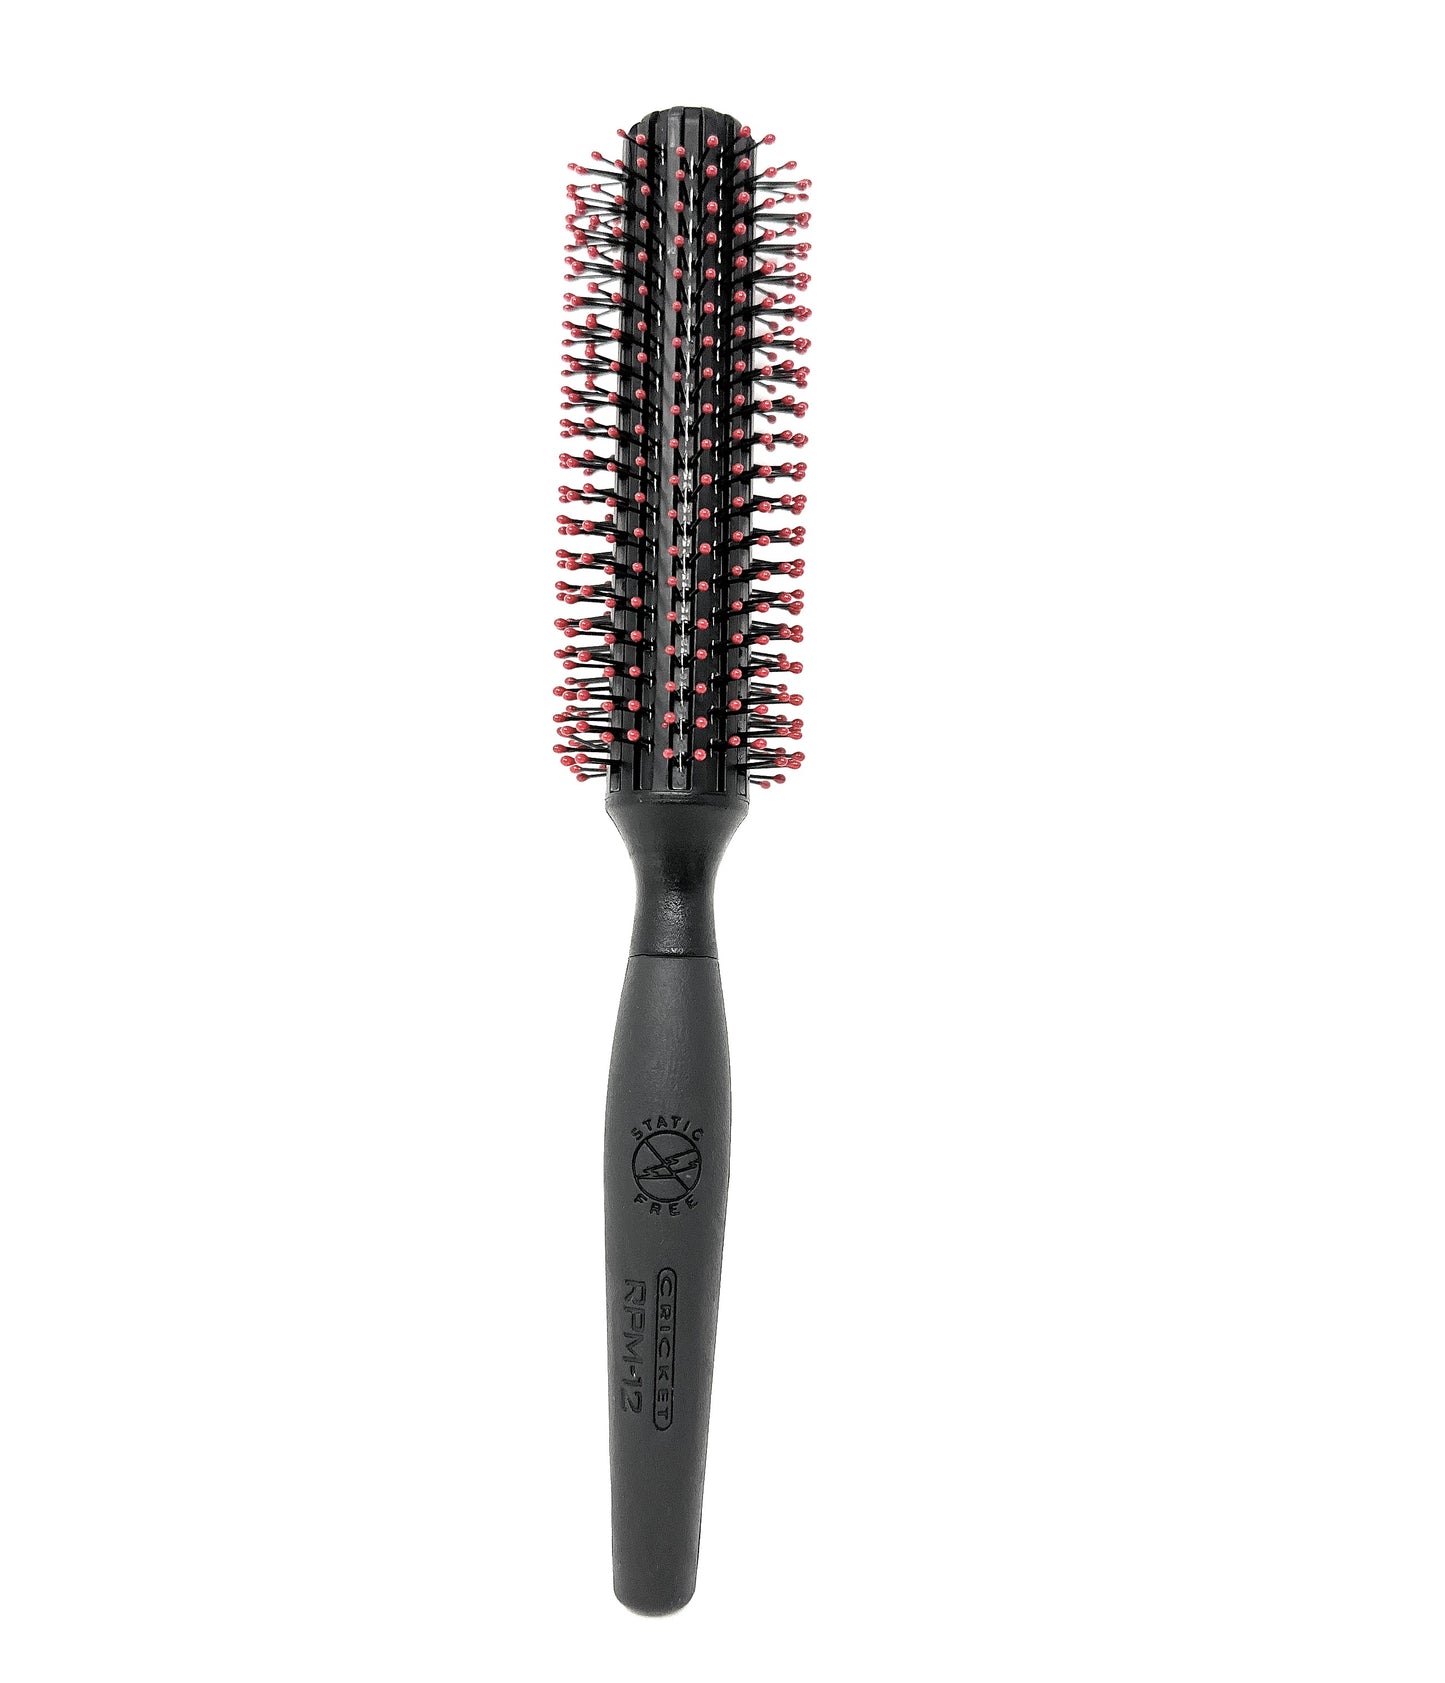 Cricket Hair Brush - RPM 12 Row For Hair Types Effortless Curling, Blow Drying, Styling